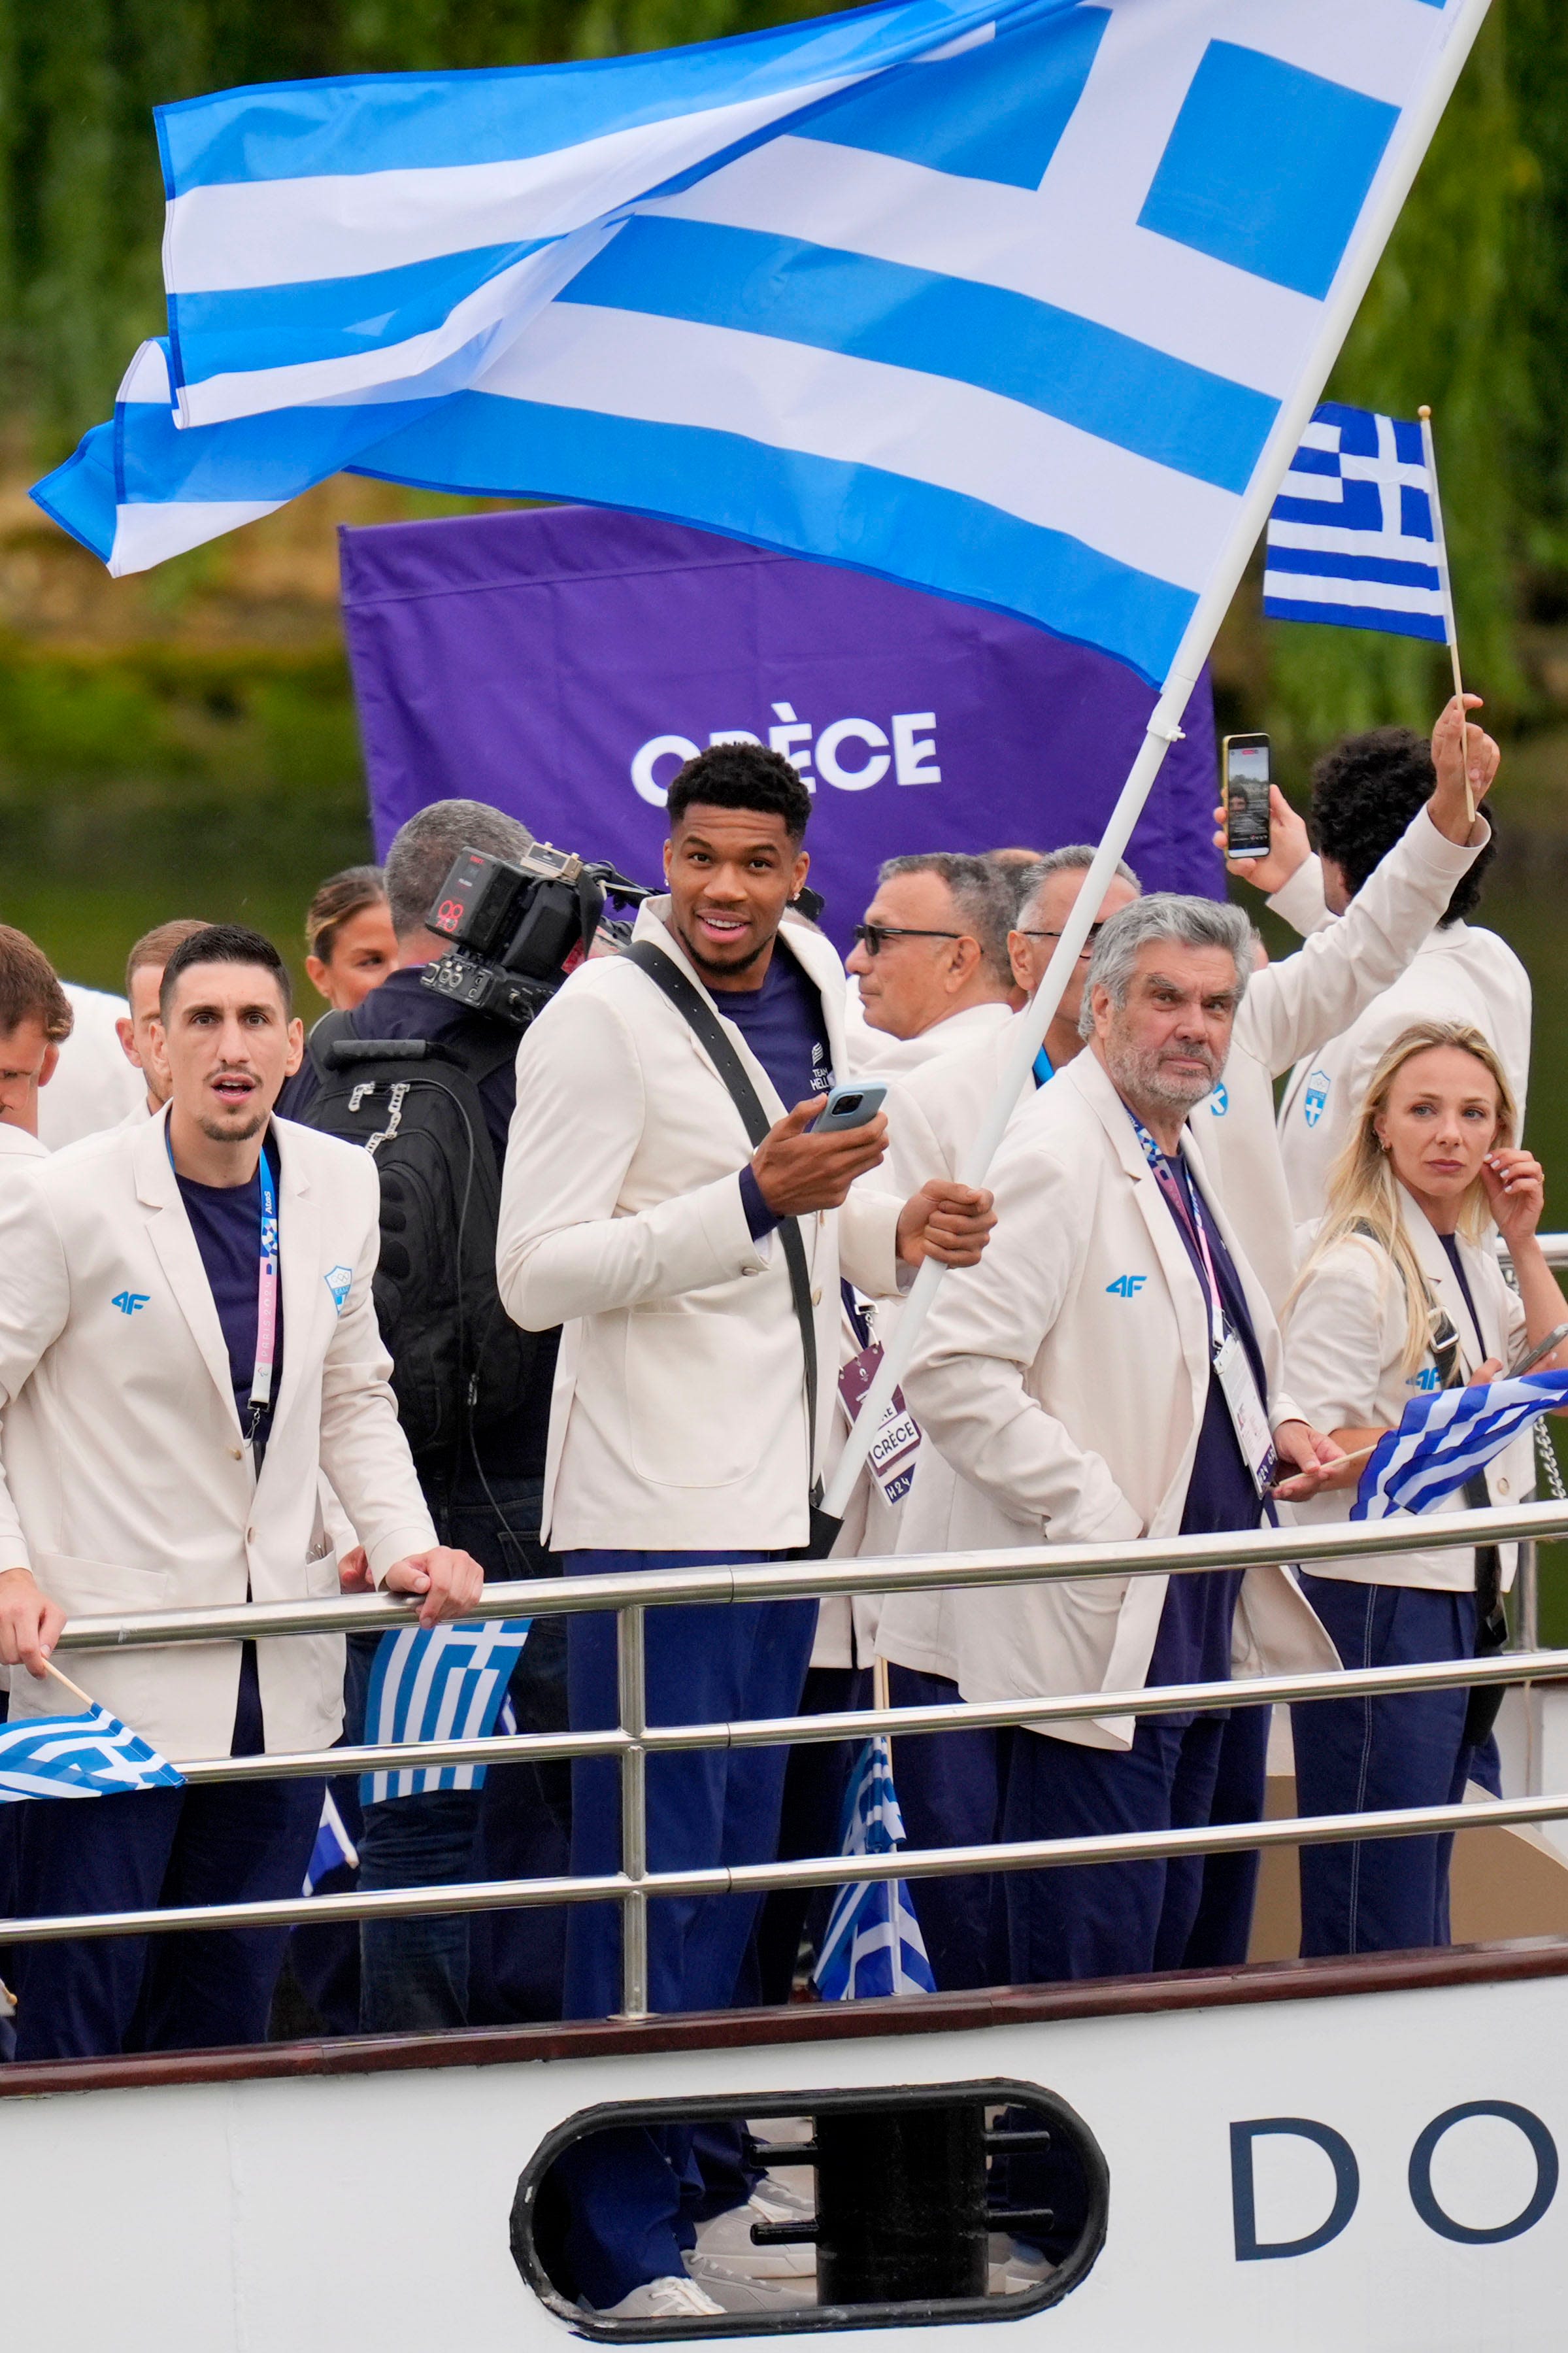 Giannis Antetokounmpo has the 'greatest honor' as Greece's flag bearer during 2024 Paris Olympics, social media reacts